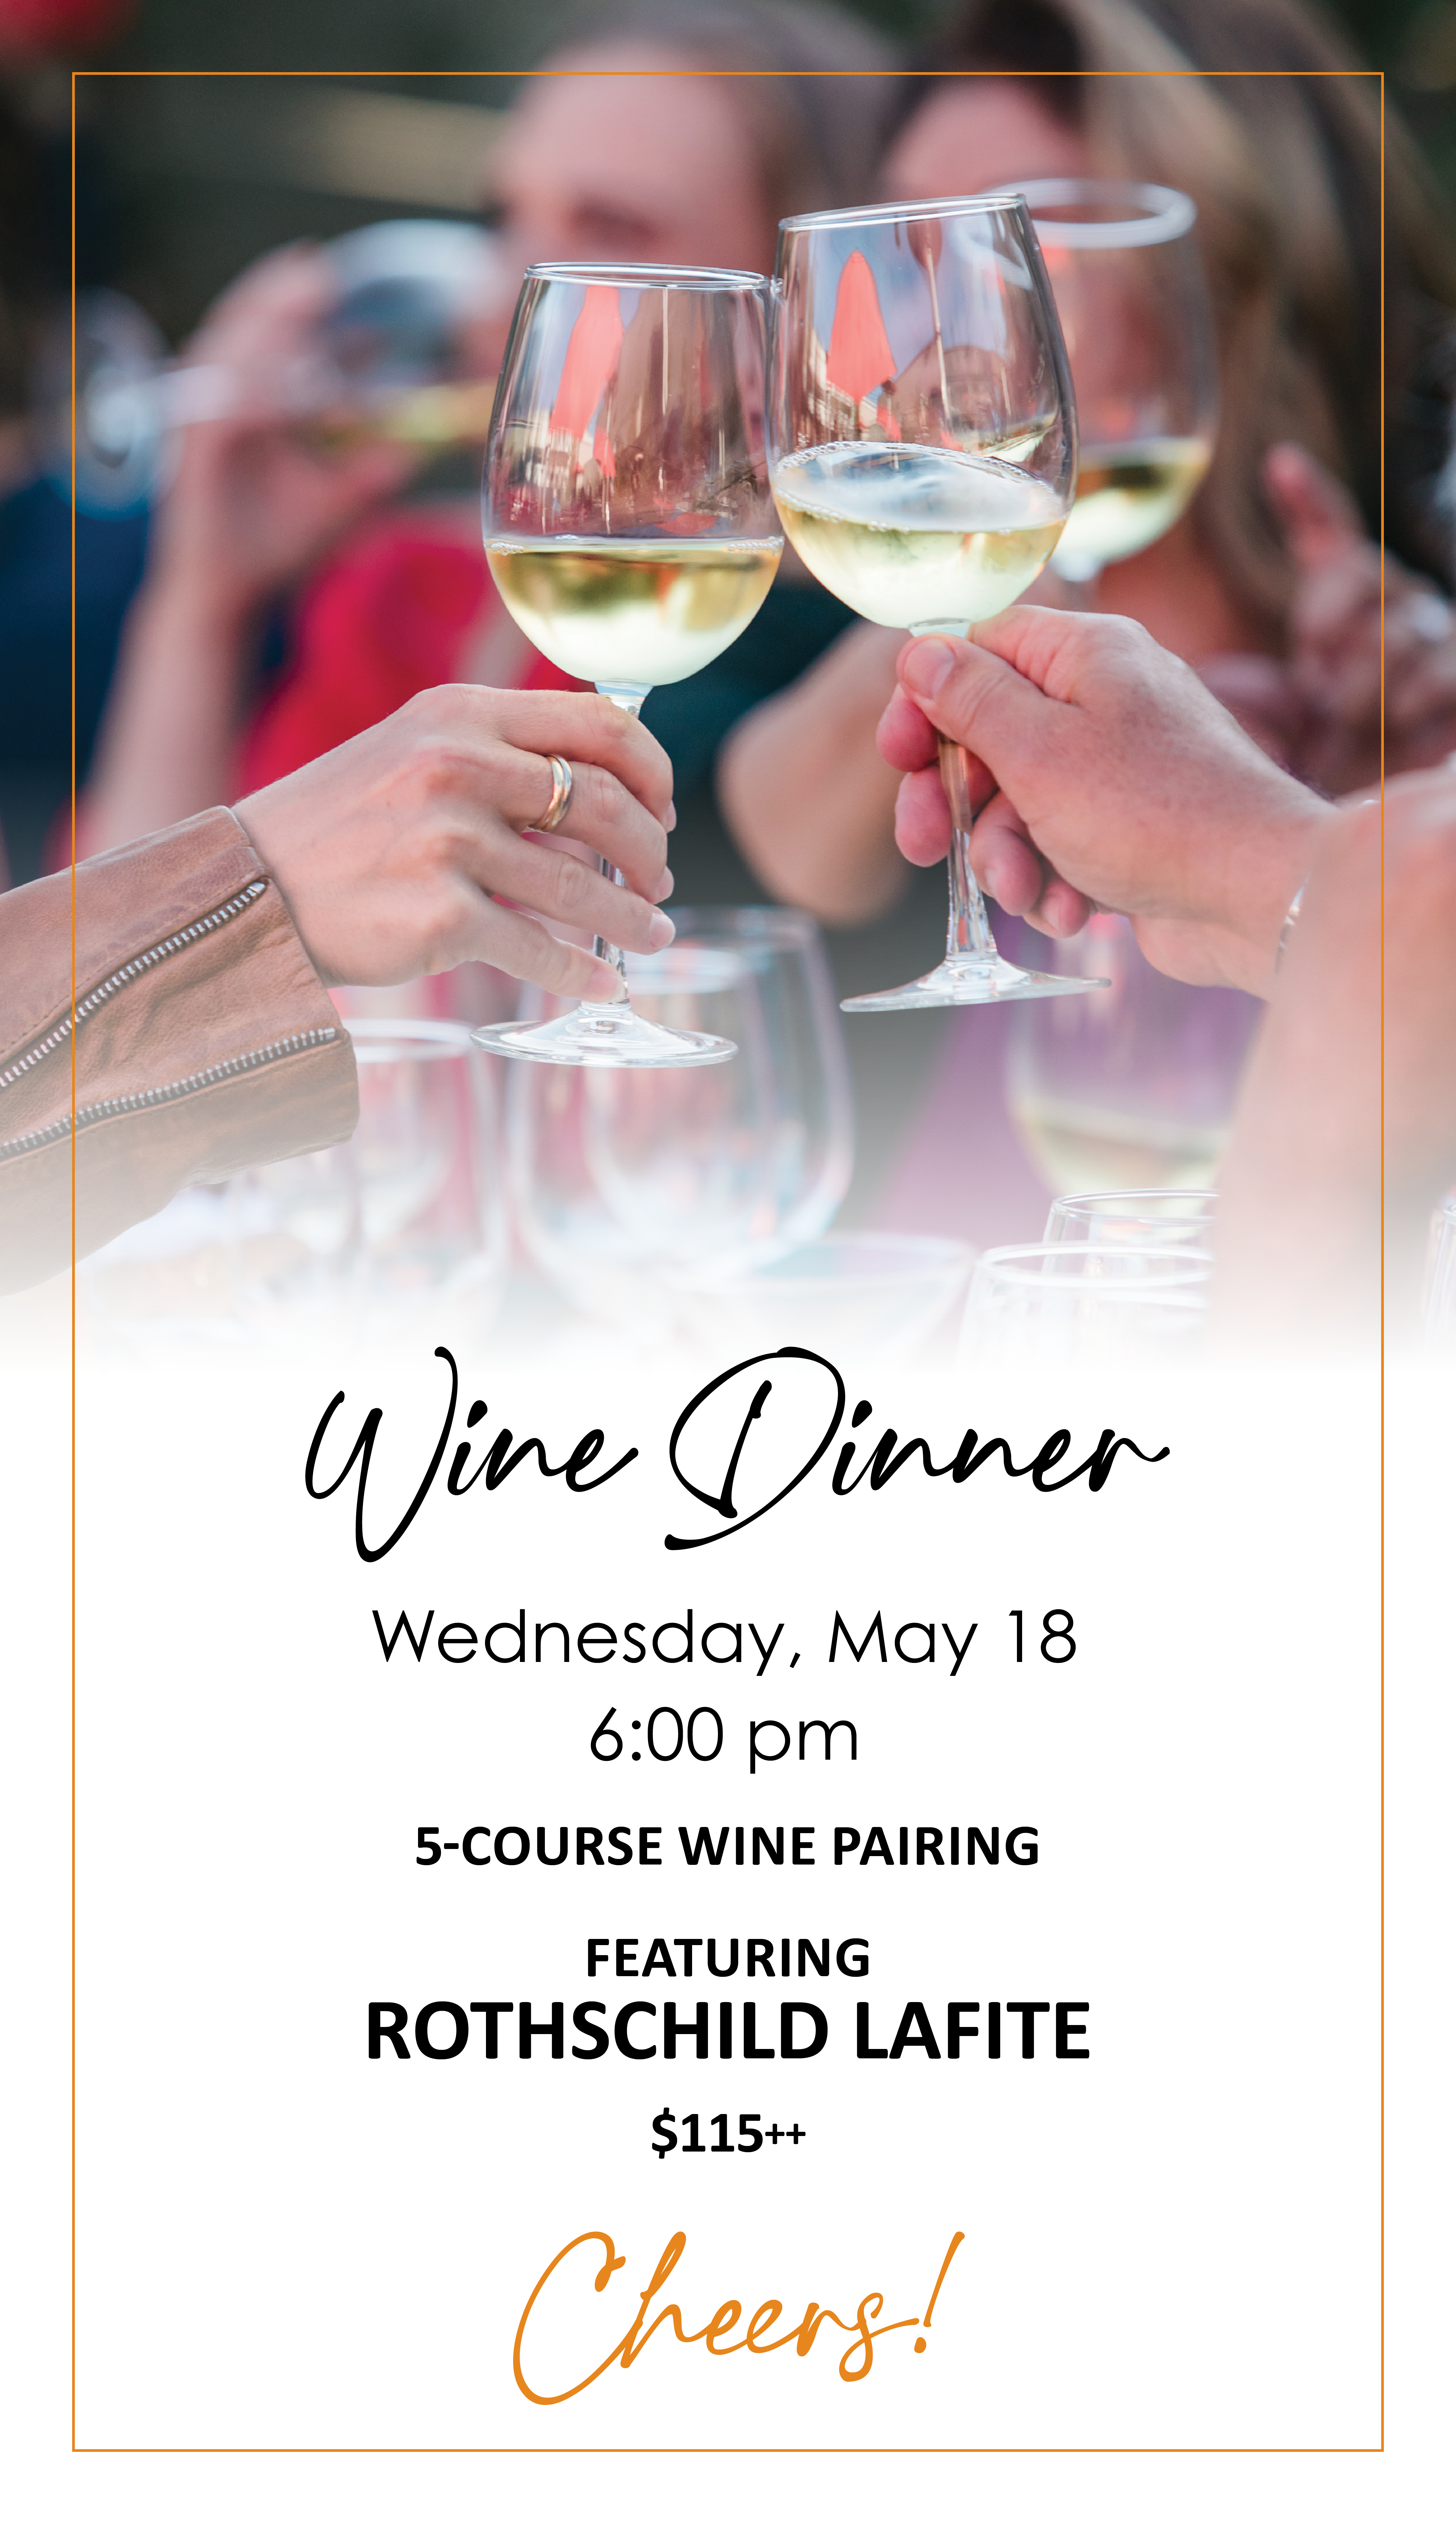 Event Posters-Wine Dinner May-Rothschild